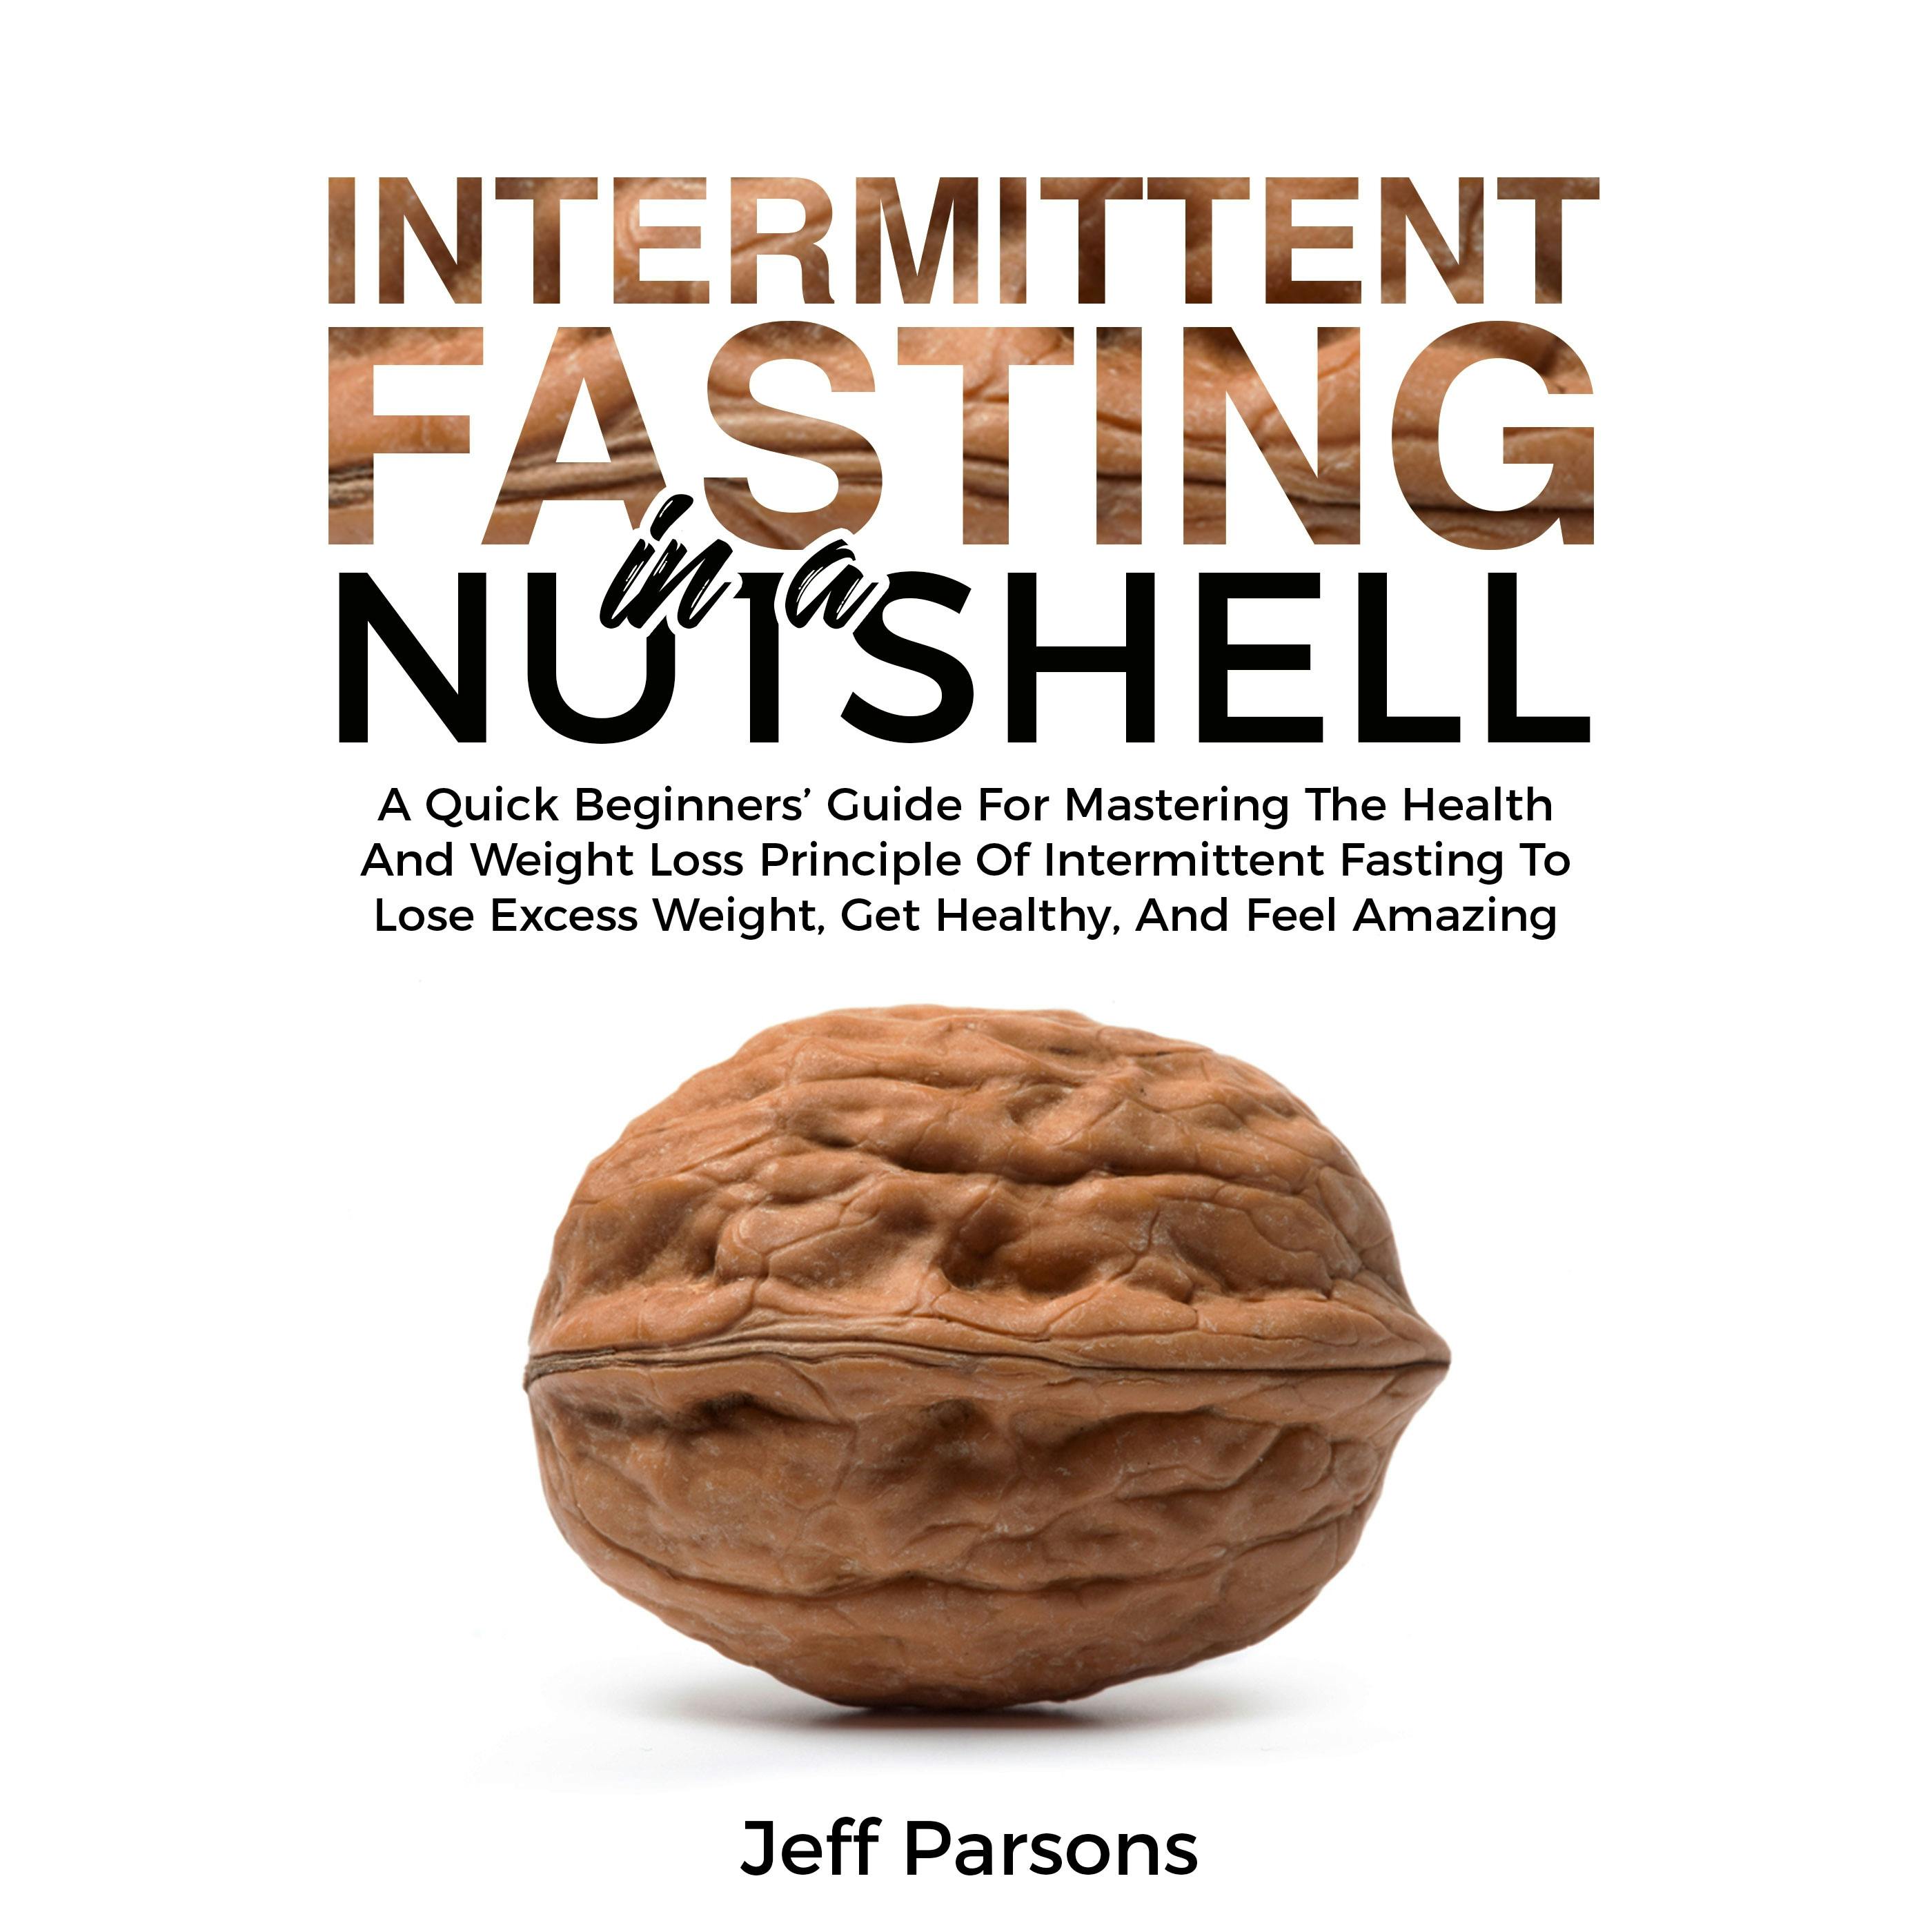 Intermittent Fasting In A Nutshell: A Quick Beginner's Guide For Mastering The Health And Weight Loss Principles Of Intermittent Fasting To Lose Excess Weight, Get Healthy, And Feel Amazing - undefined